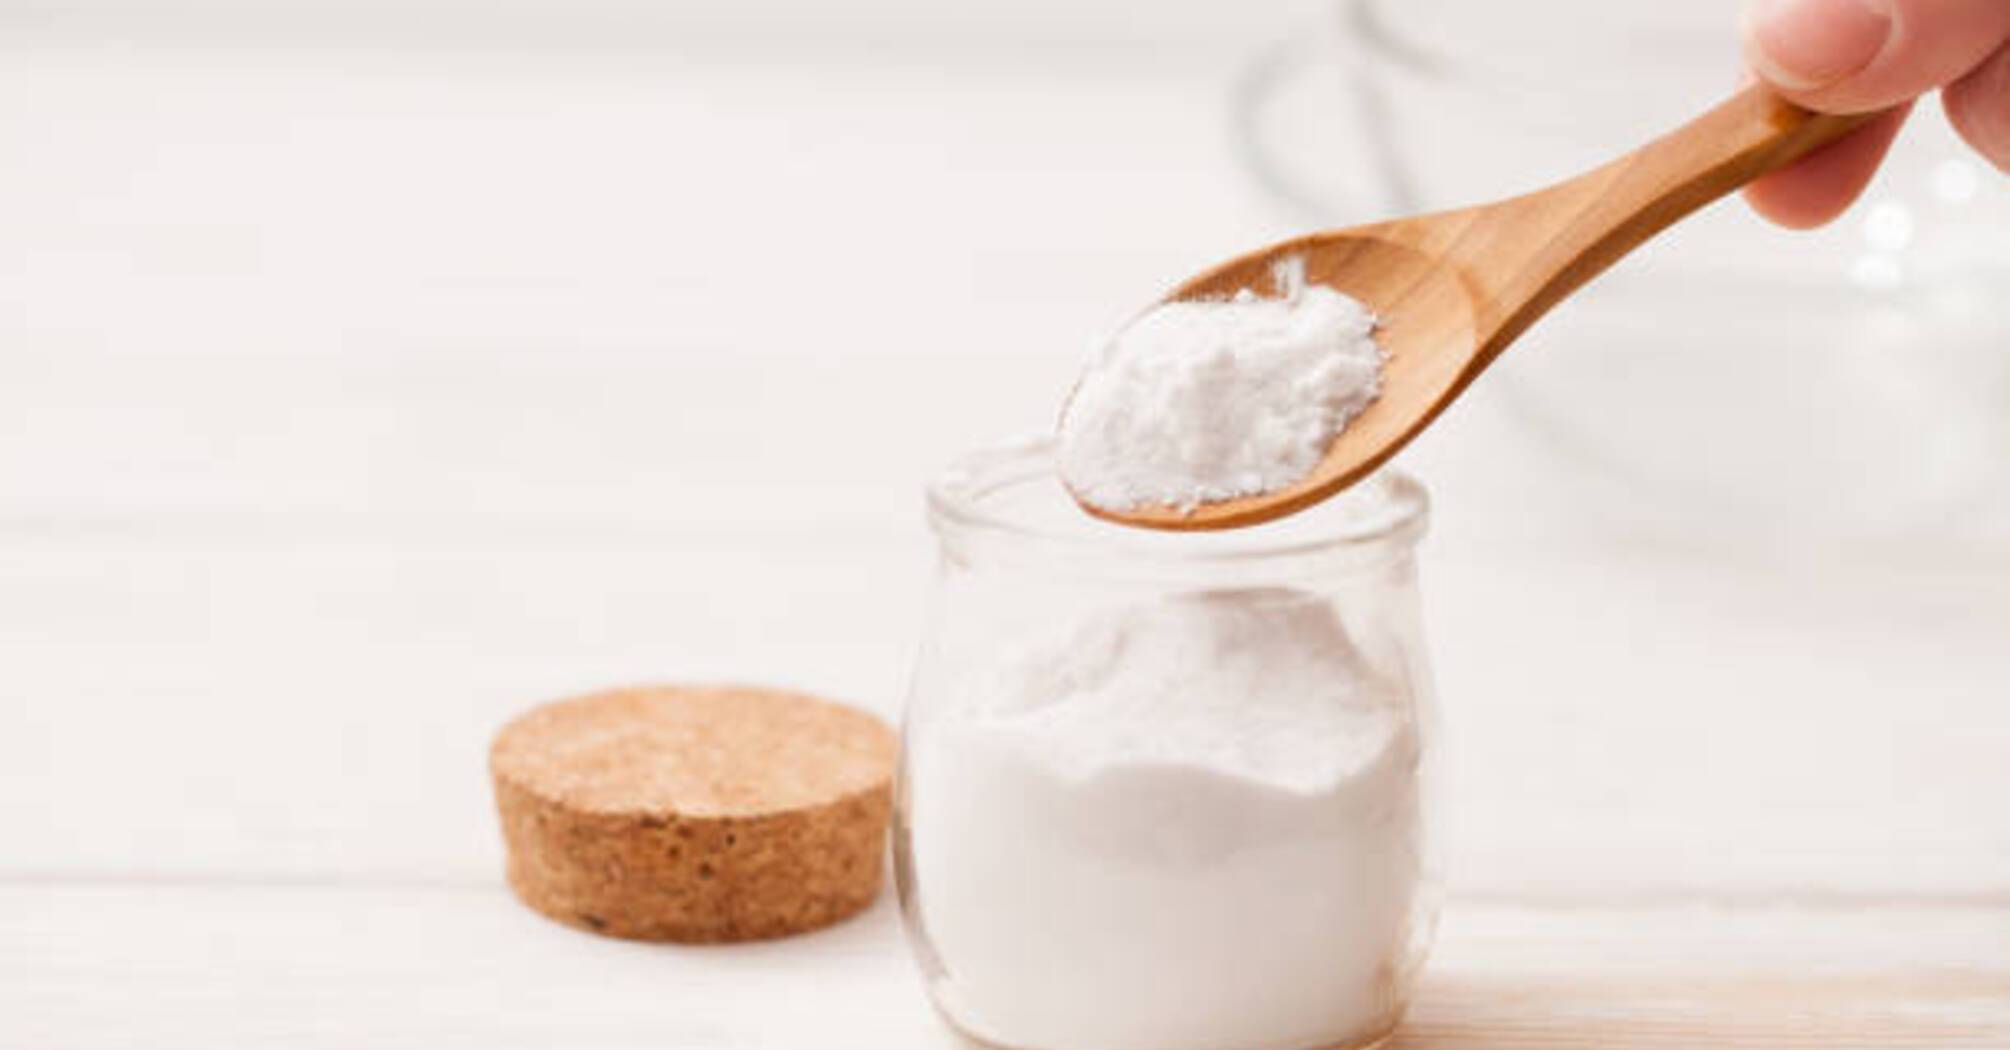 They will be ruined: 3 things you should never clean with baking soda